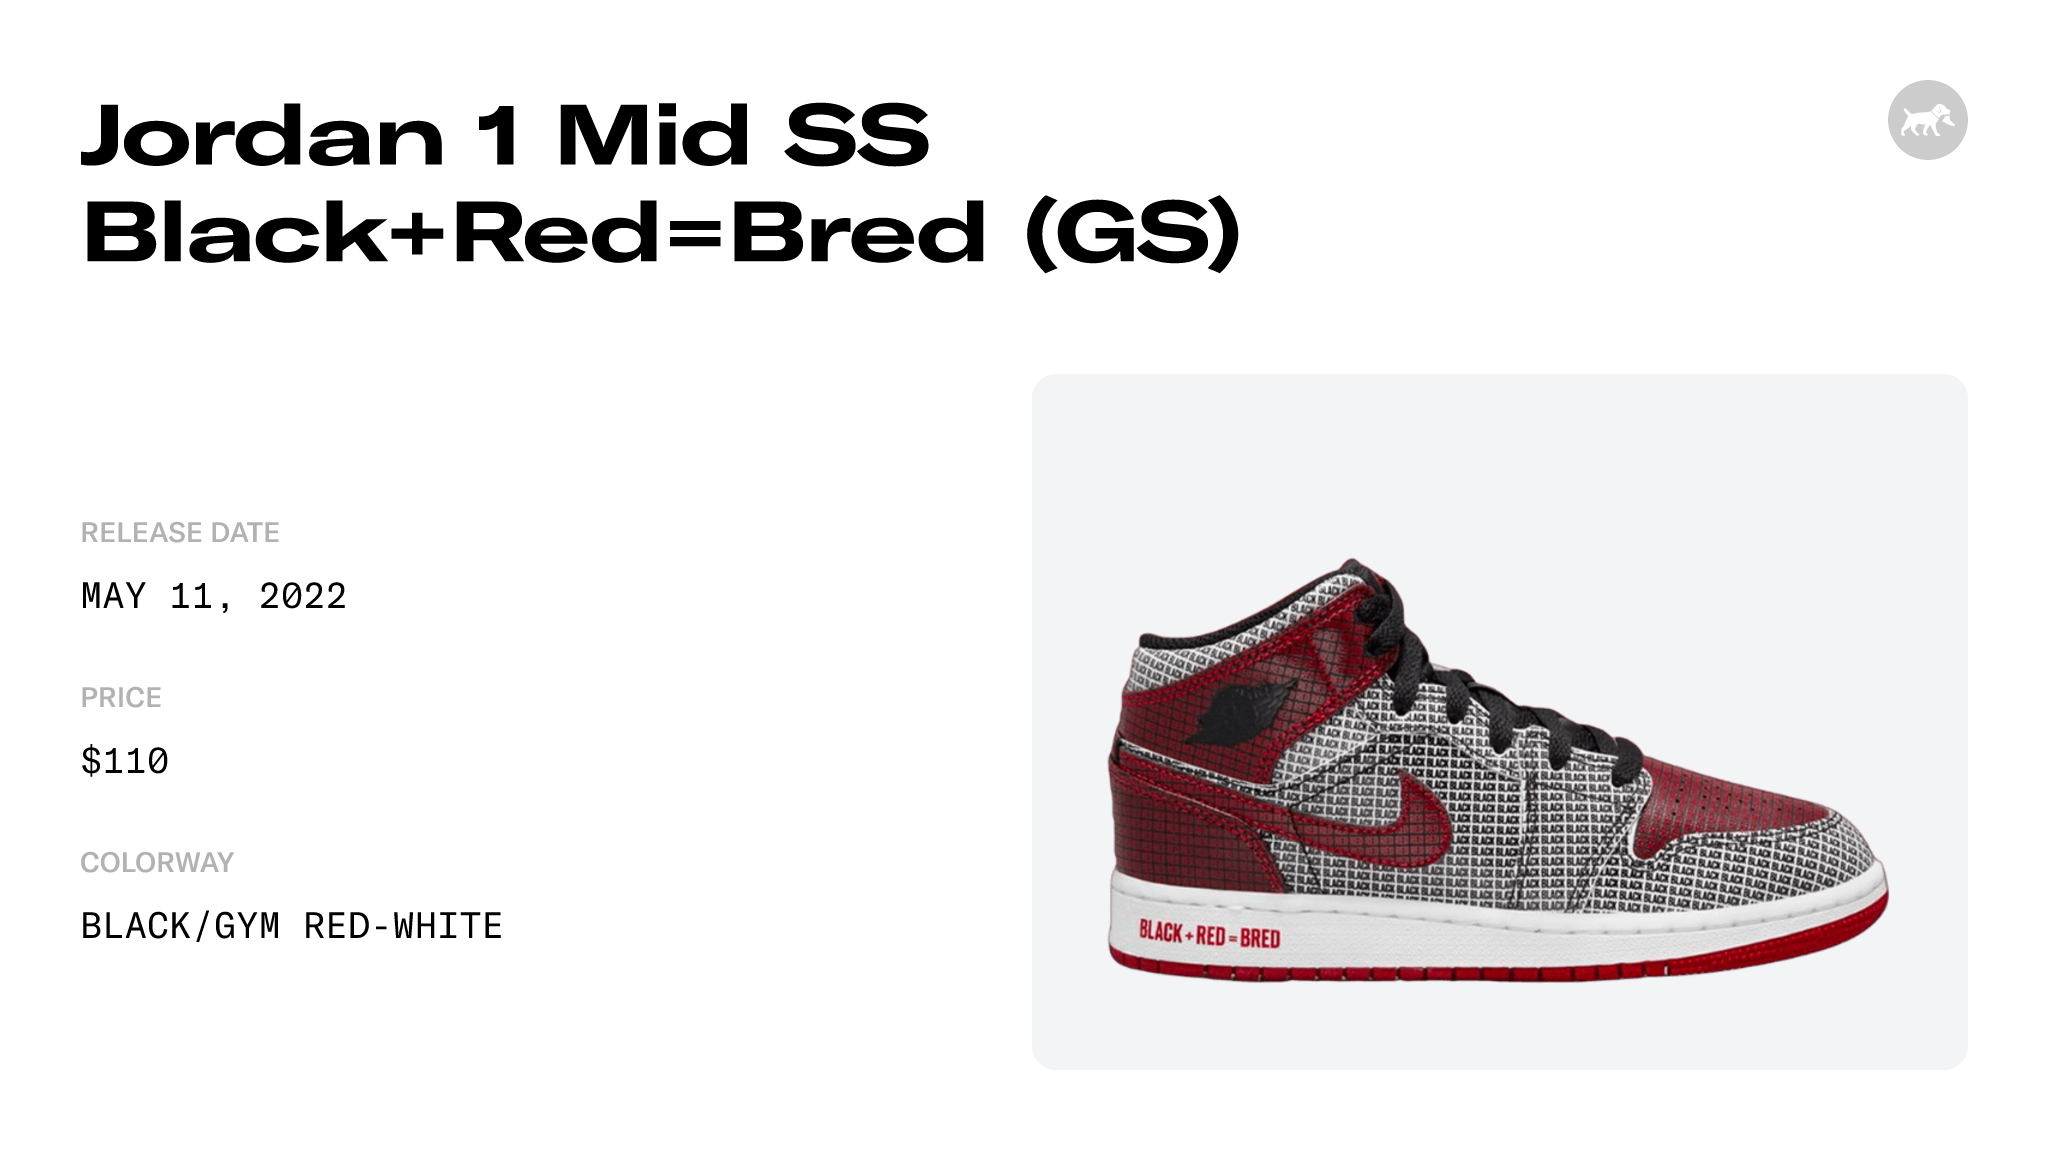 Jordan 1 Mid SS Black+Red=Bred (GS) - DM9650-001 Raffles and Release Date